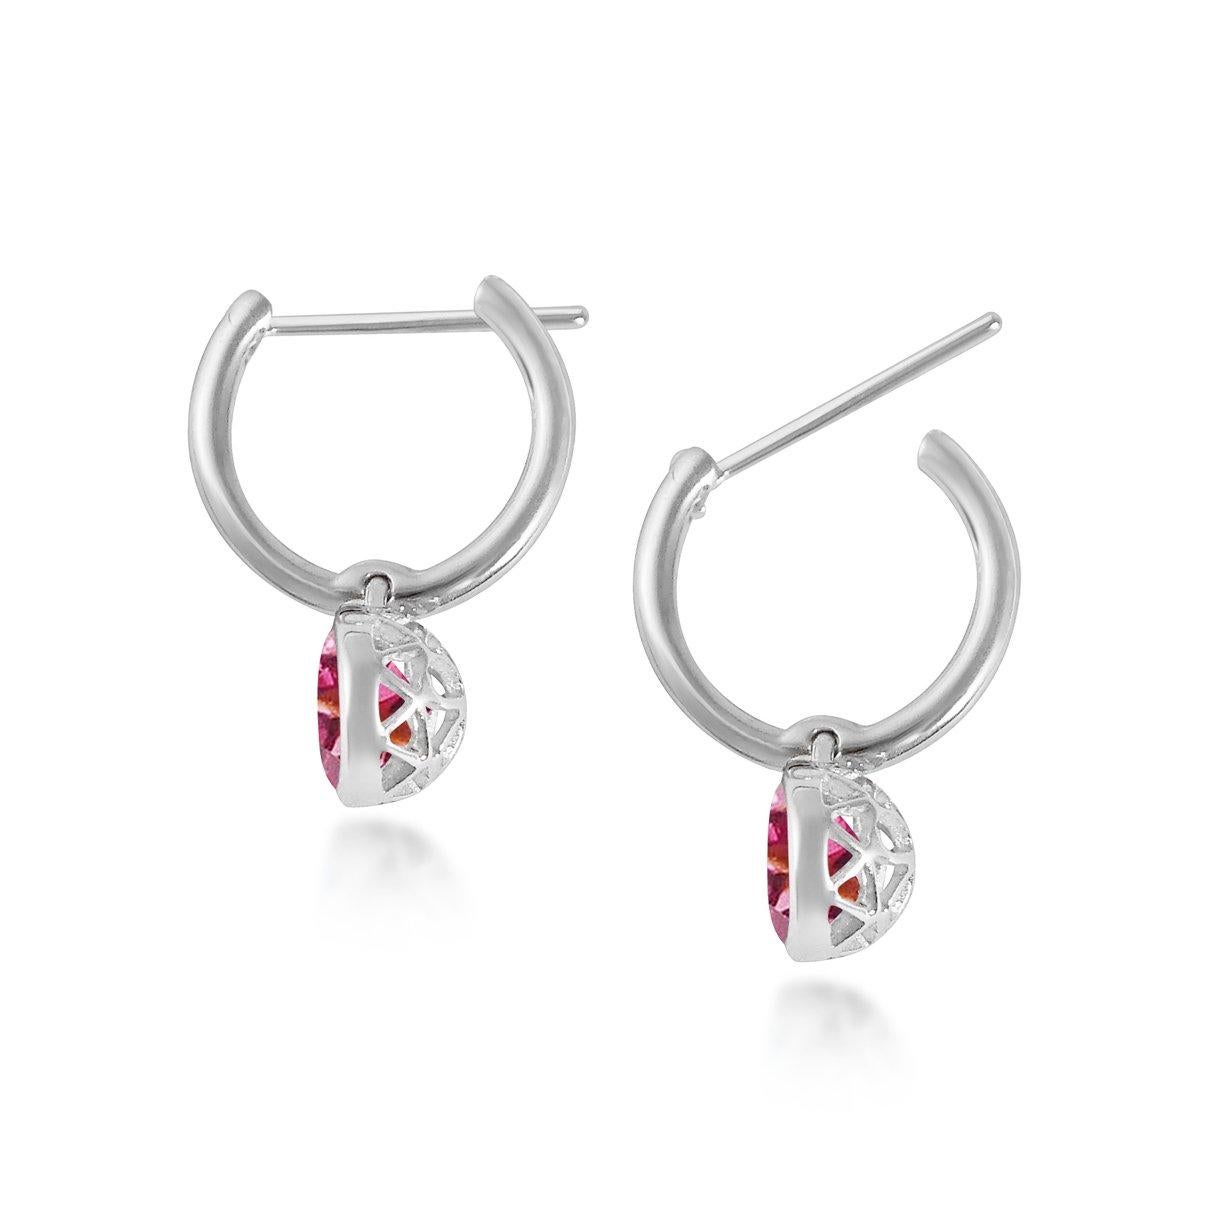 Handcrafted 2.60 Carats Pink Tourmaline 18 Karat White Gold Drop Earrings. The 8mm natural stones are set in our iconic hand pierced gold lace to let the light through. Our precious and fine stones on our dangling earrings are highlighted by a